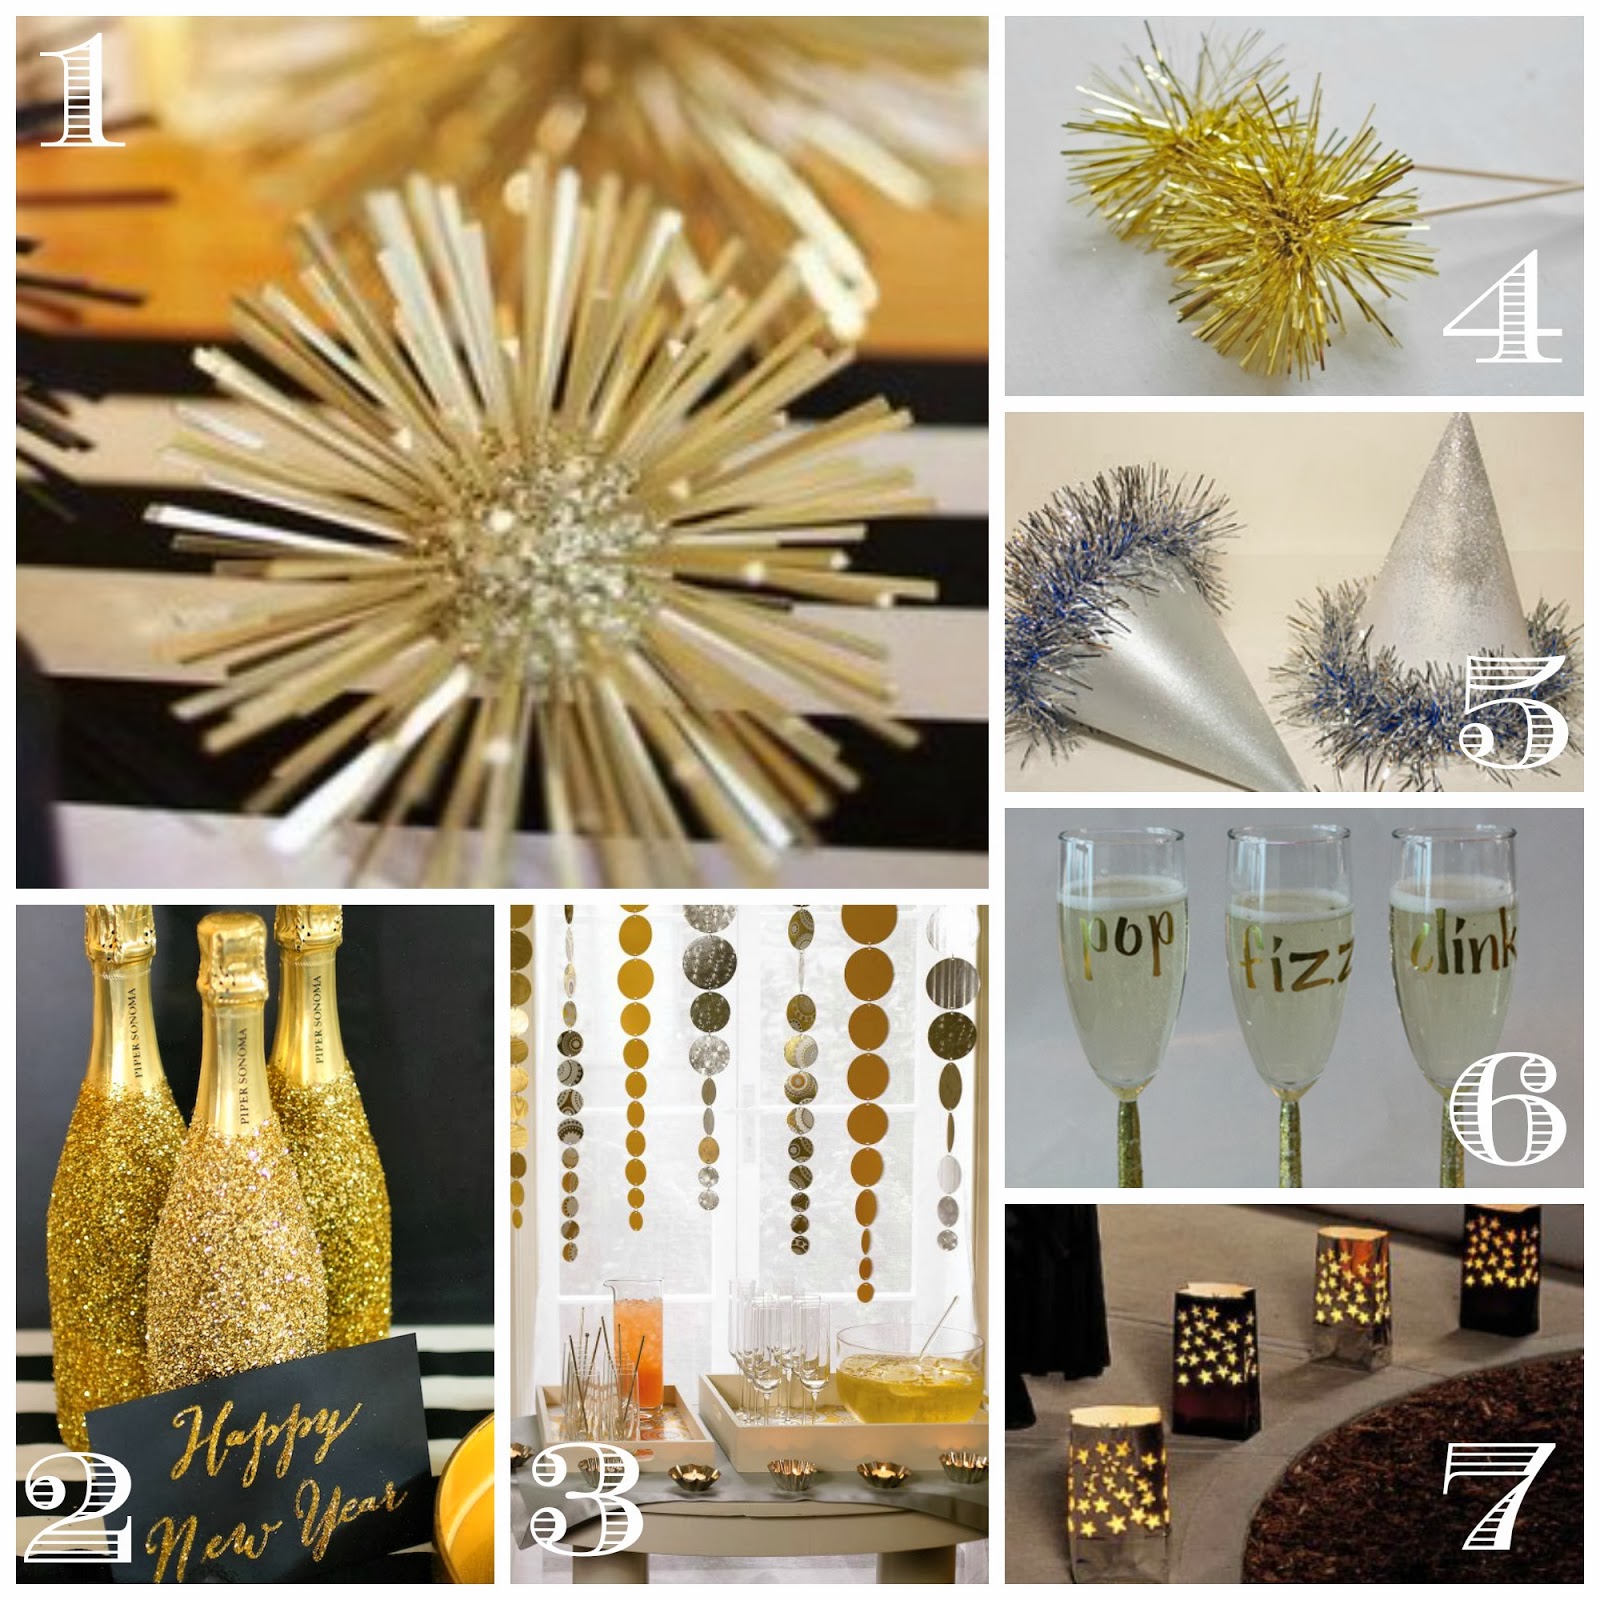 cathey with an e: saturday's seven - new year's eve decorations